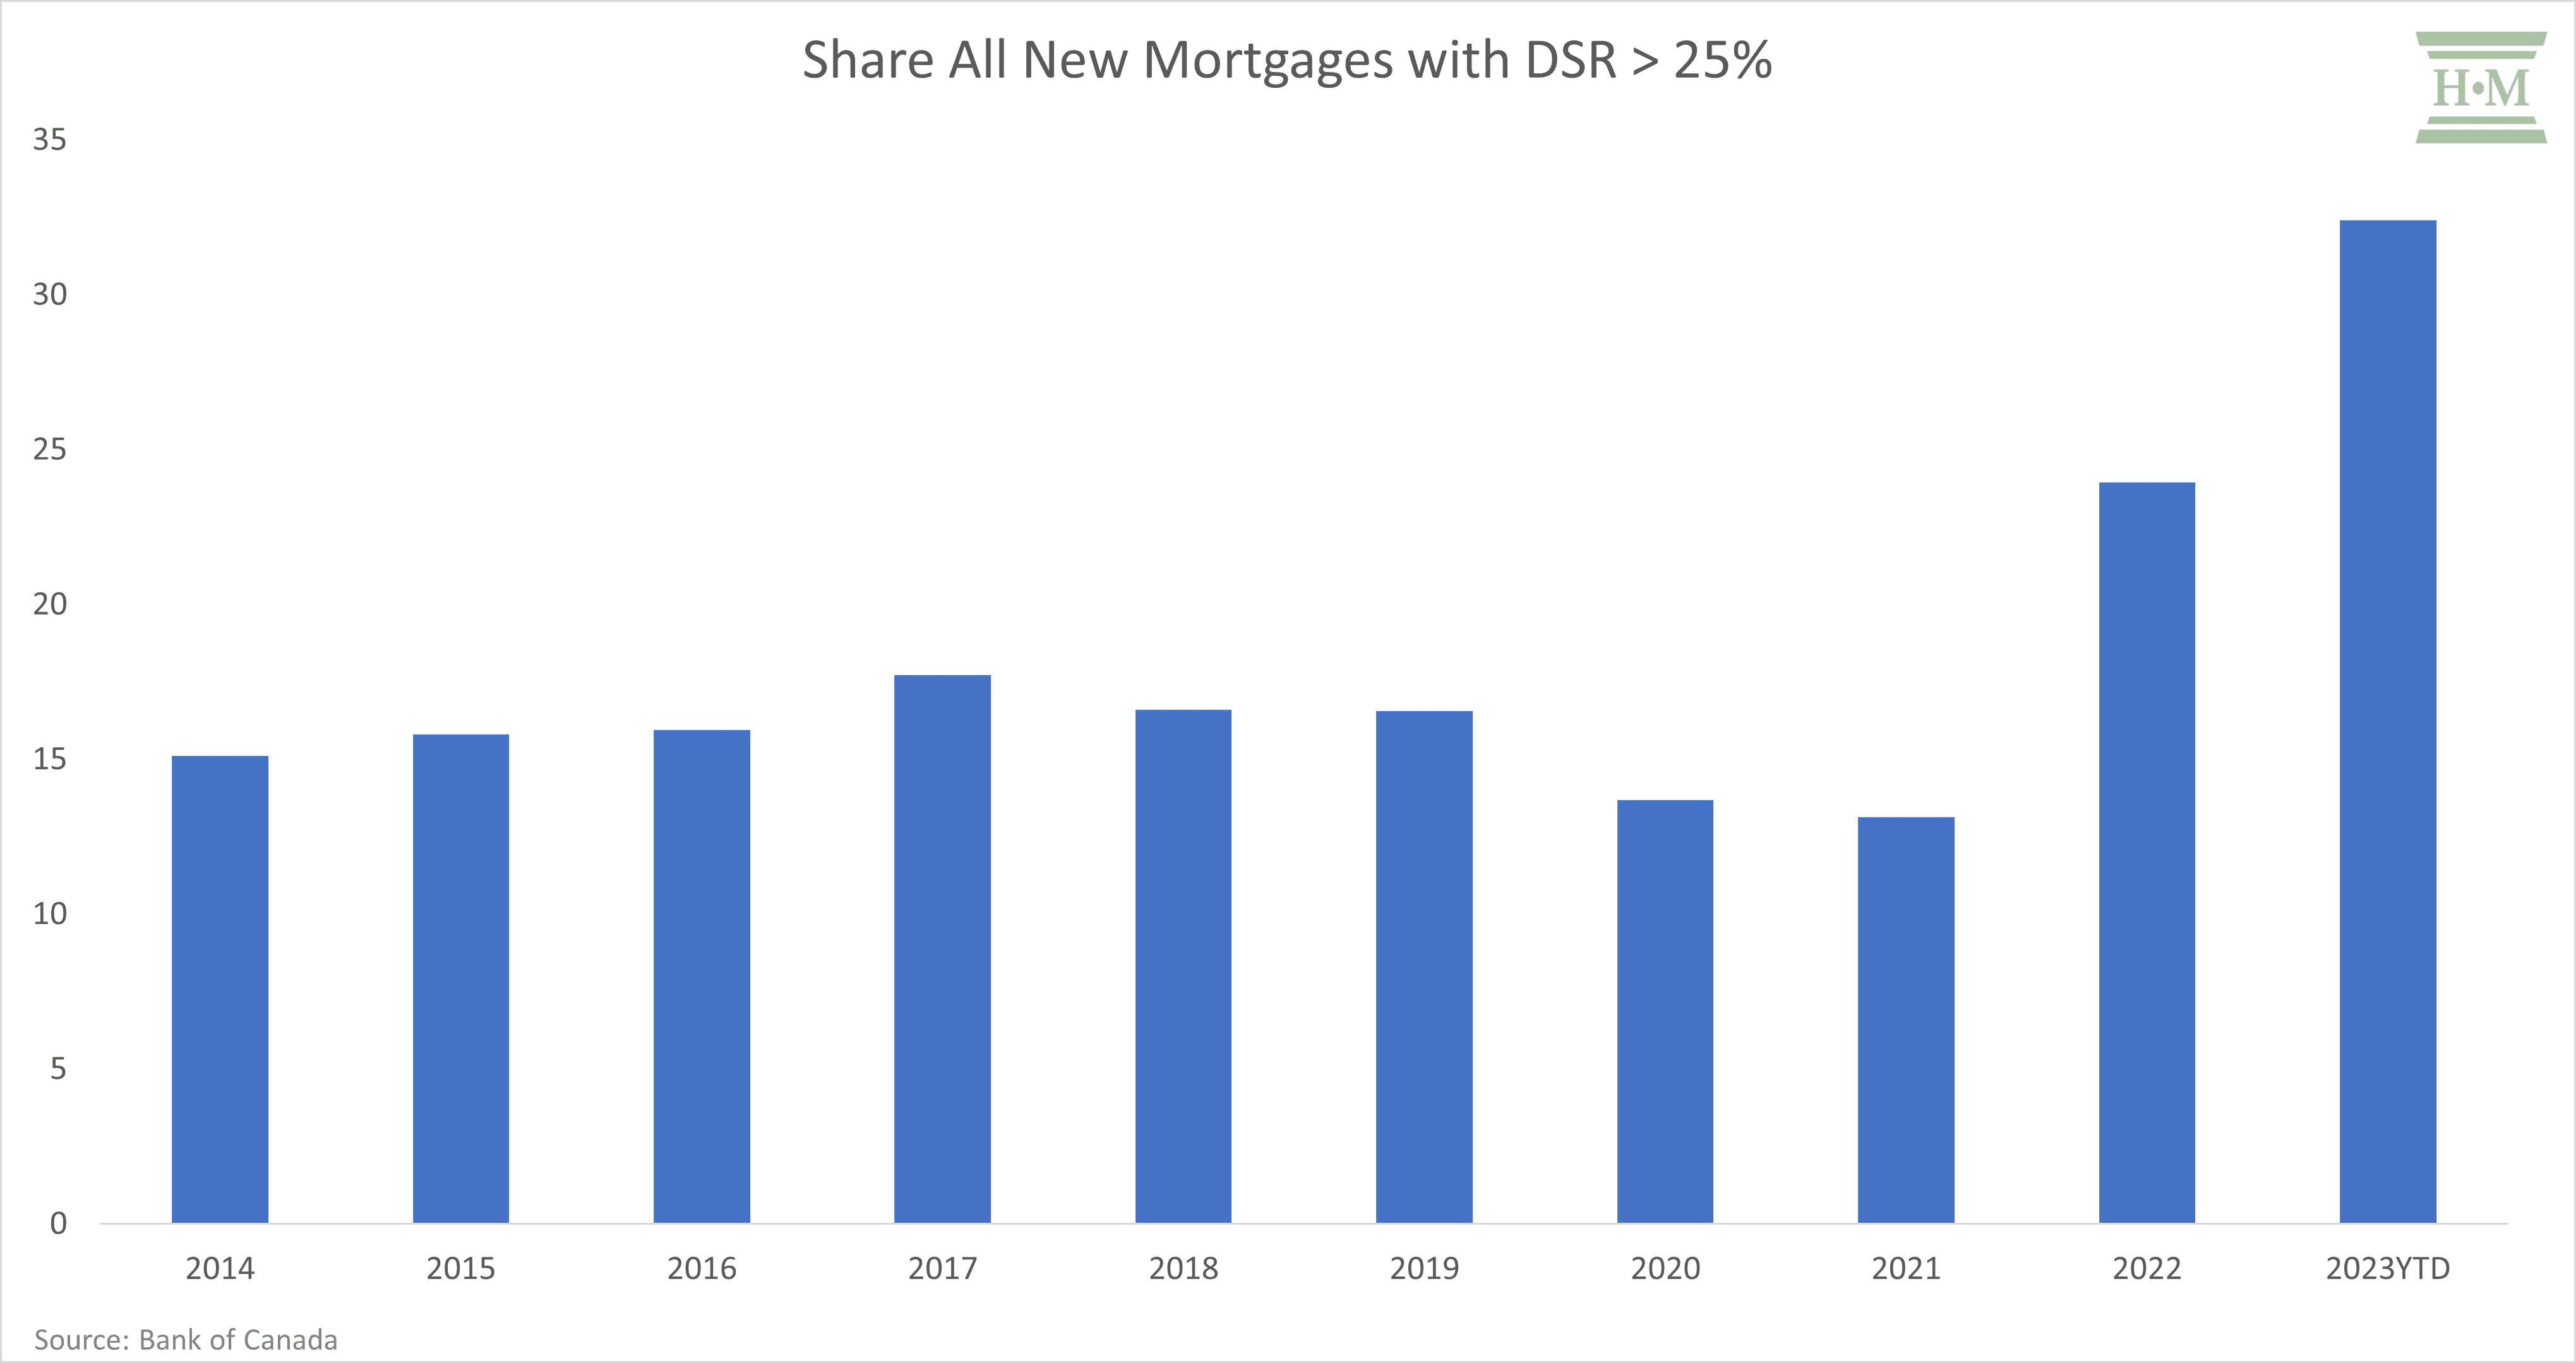 Share All New Mortgages with DSR 25 Percent